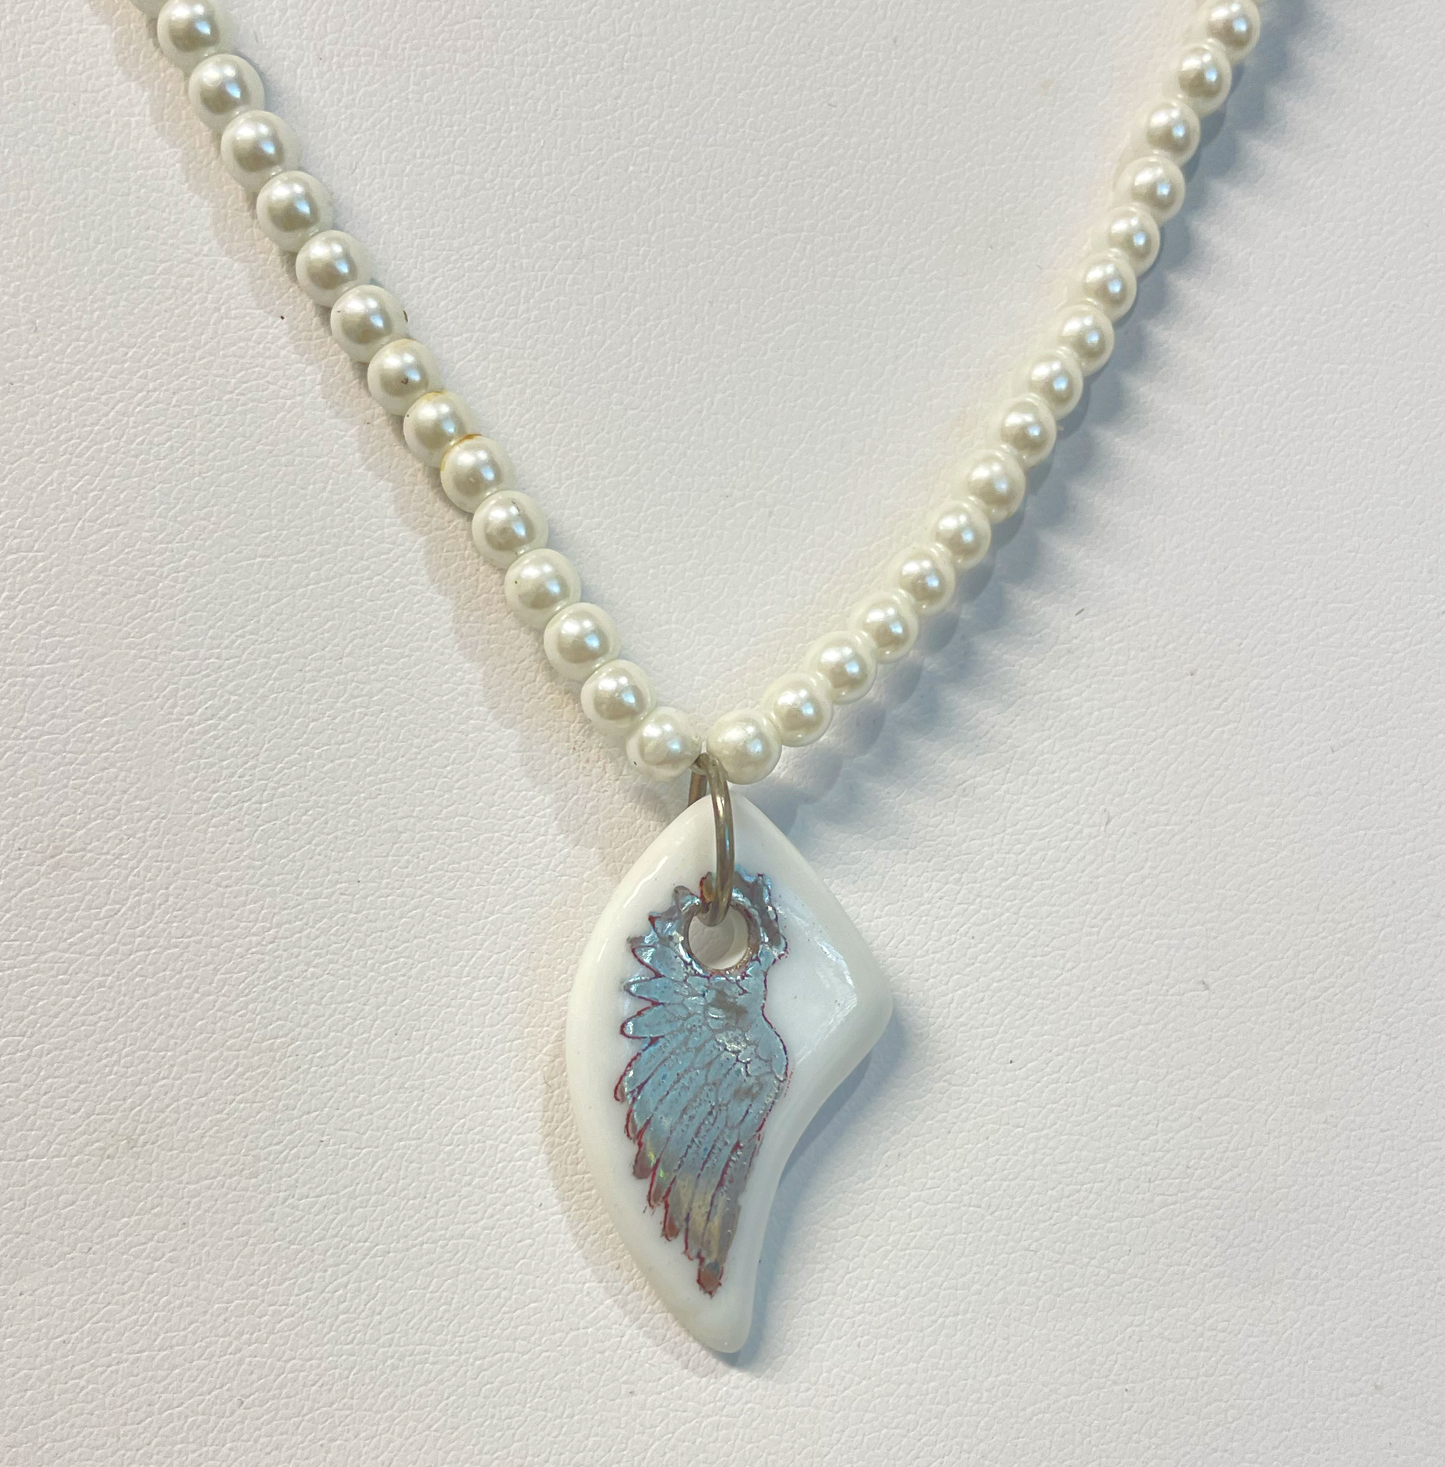 A gift, gift for an angel wing lover, Celestial Necklace